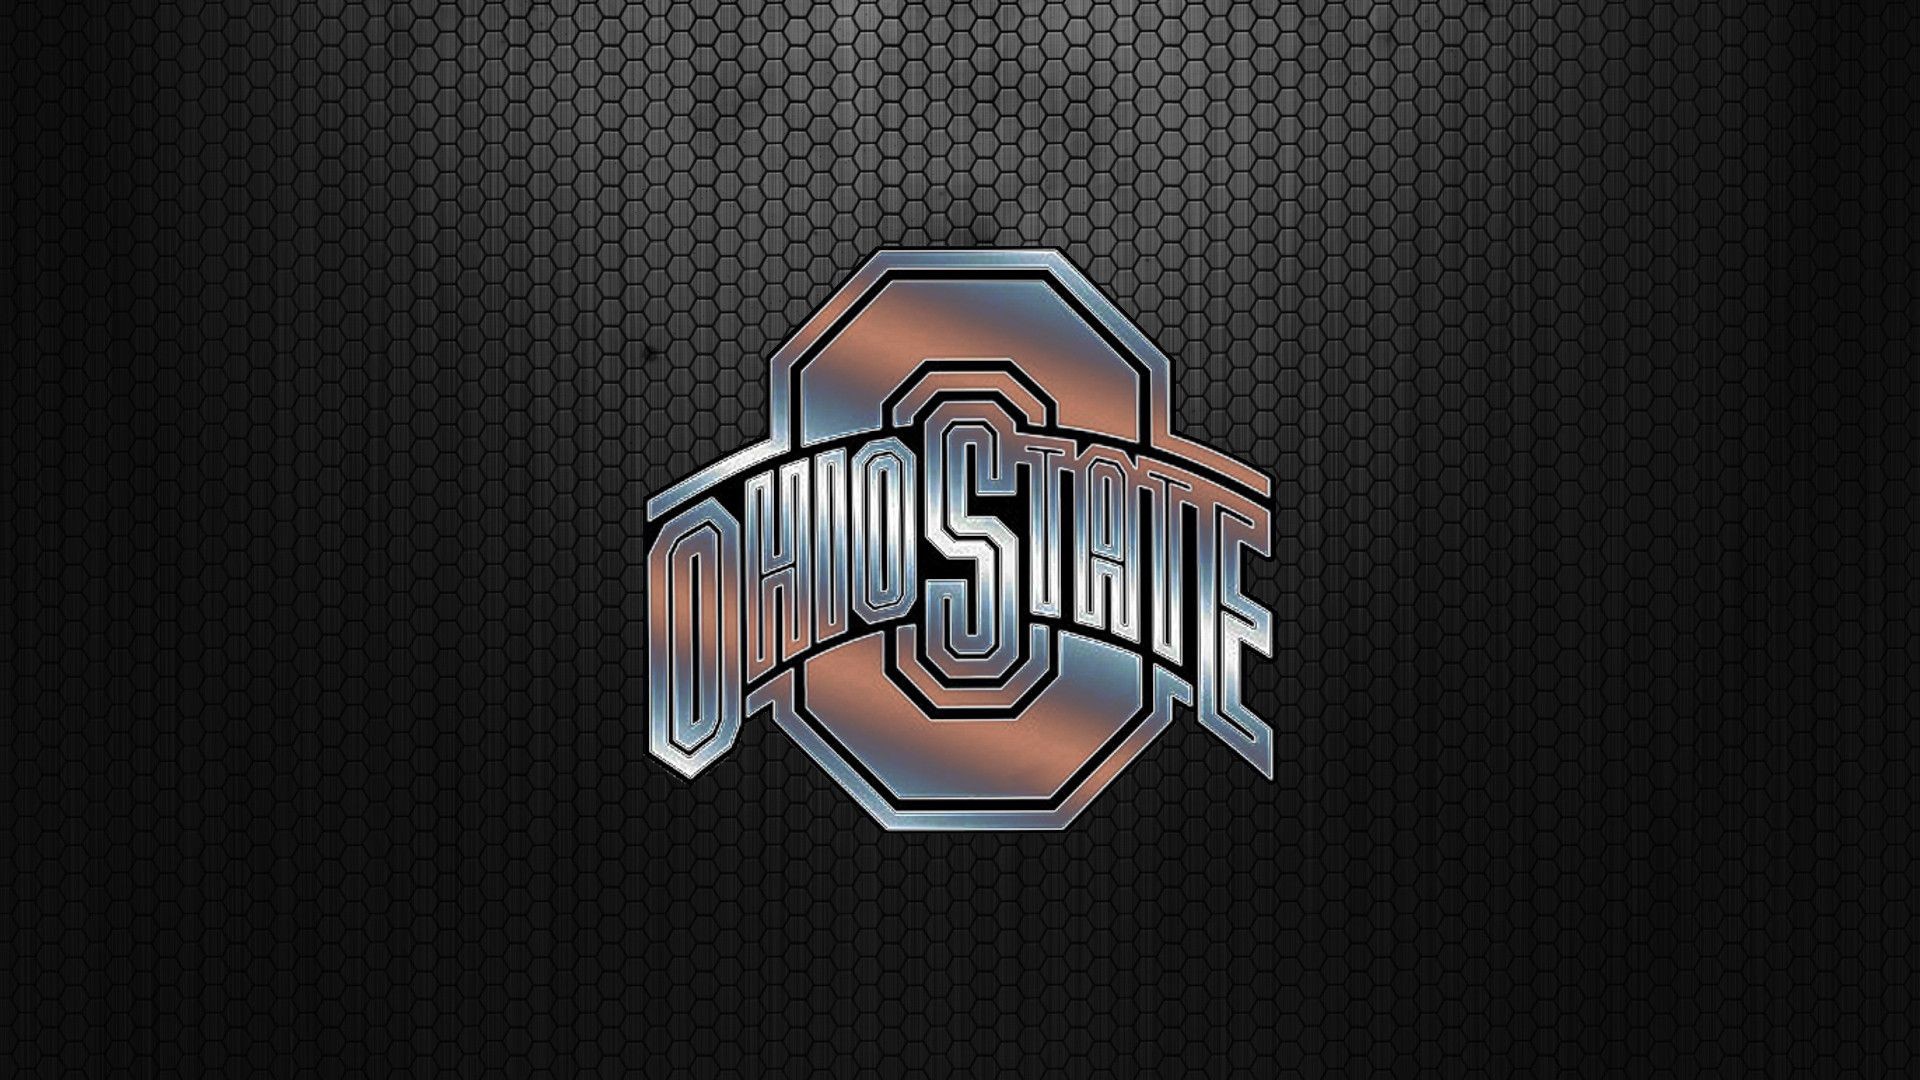 1920x1080 Search Results for “ohio state wallpaper android” – Adorable Wallpapers